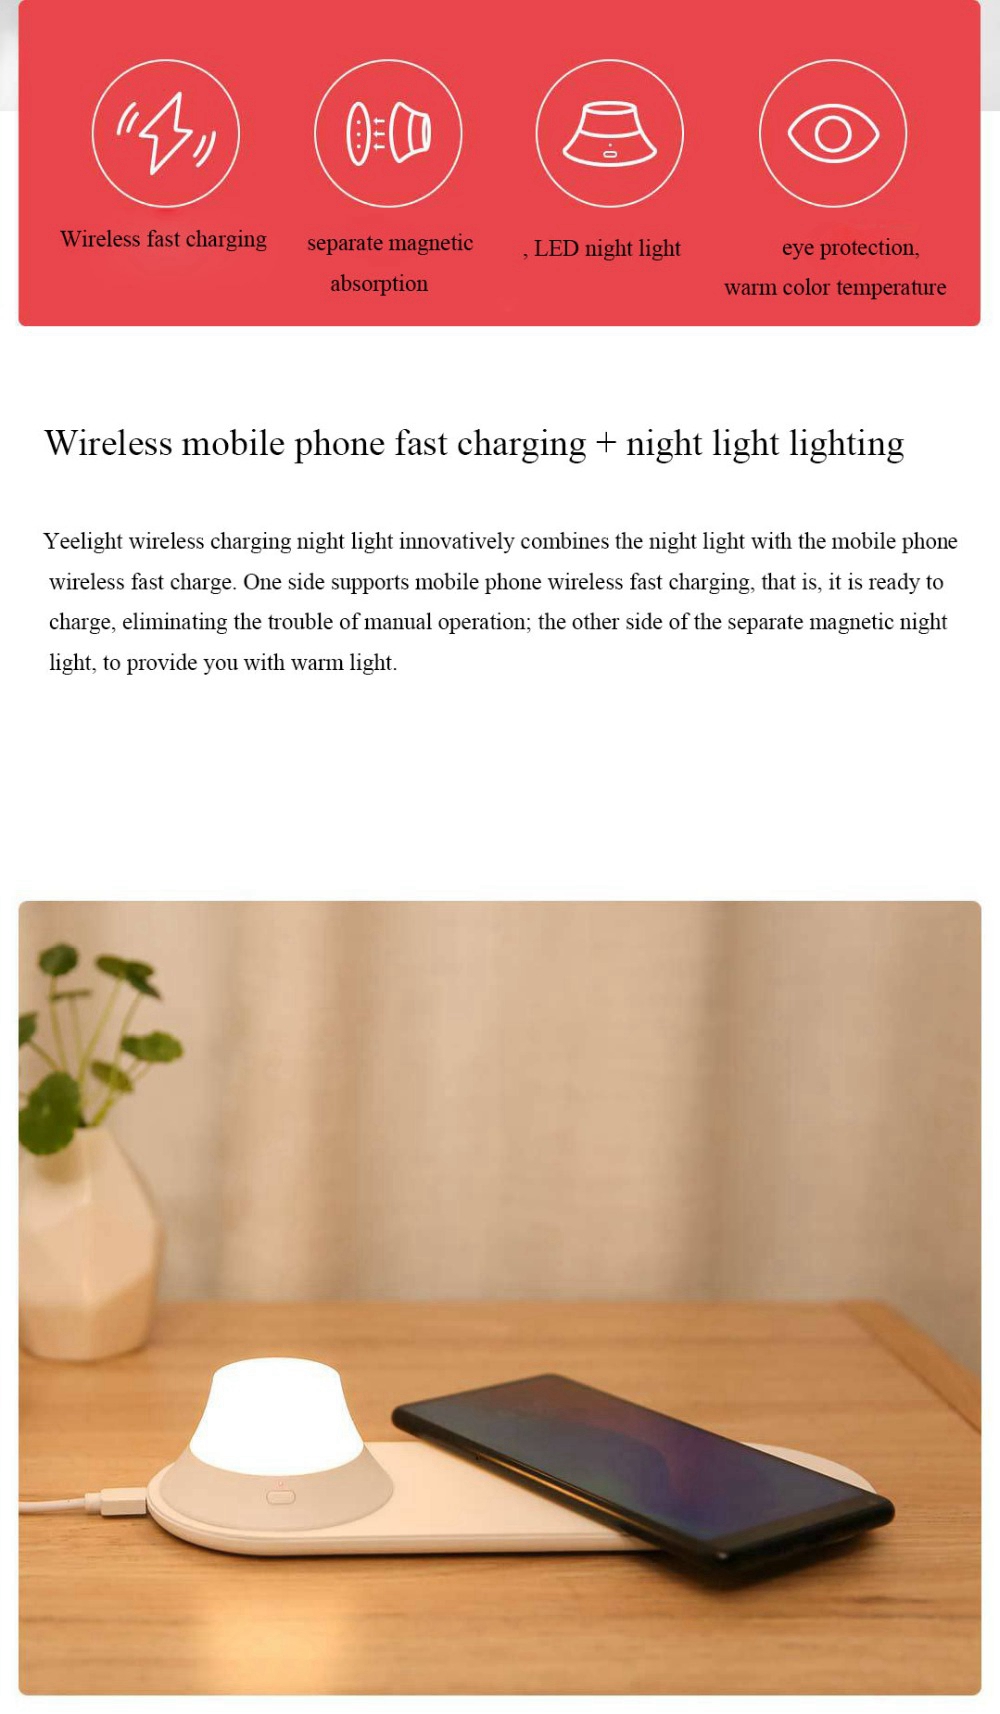 Yeelight-Wireless-Charger-with-LED-Night-Light-Magnetic-Attraction-Fast-Charging-For-iPhone--Ecosyst-1414272-2